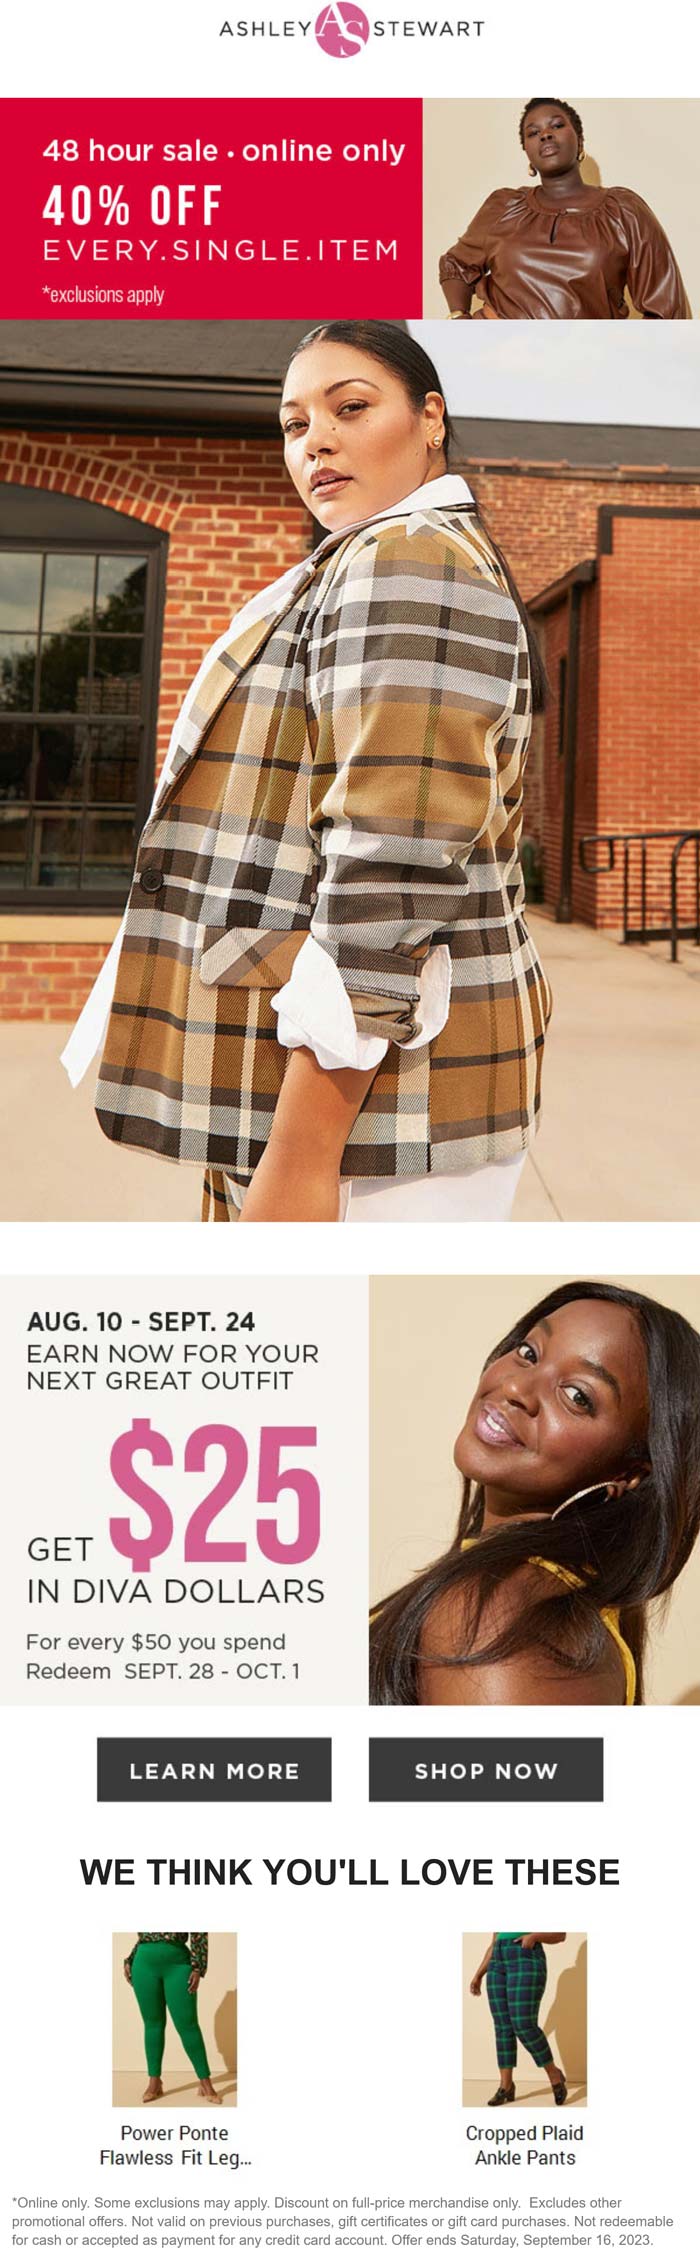 Ashley Stewart stores Coupon  40% off everything online today at Ashley Stewart #ashleystewart 